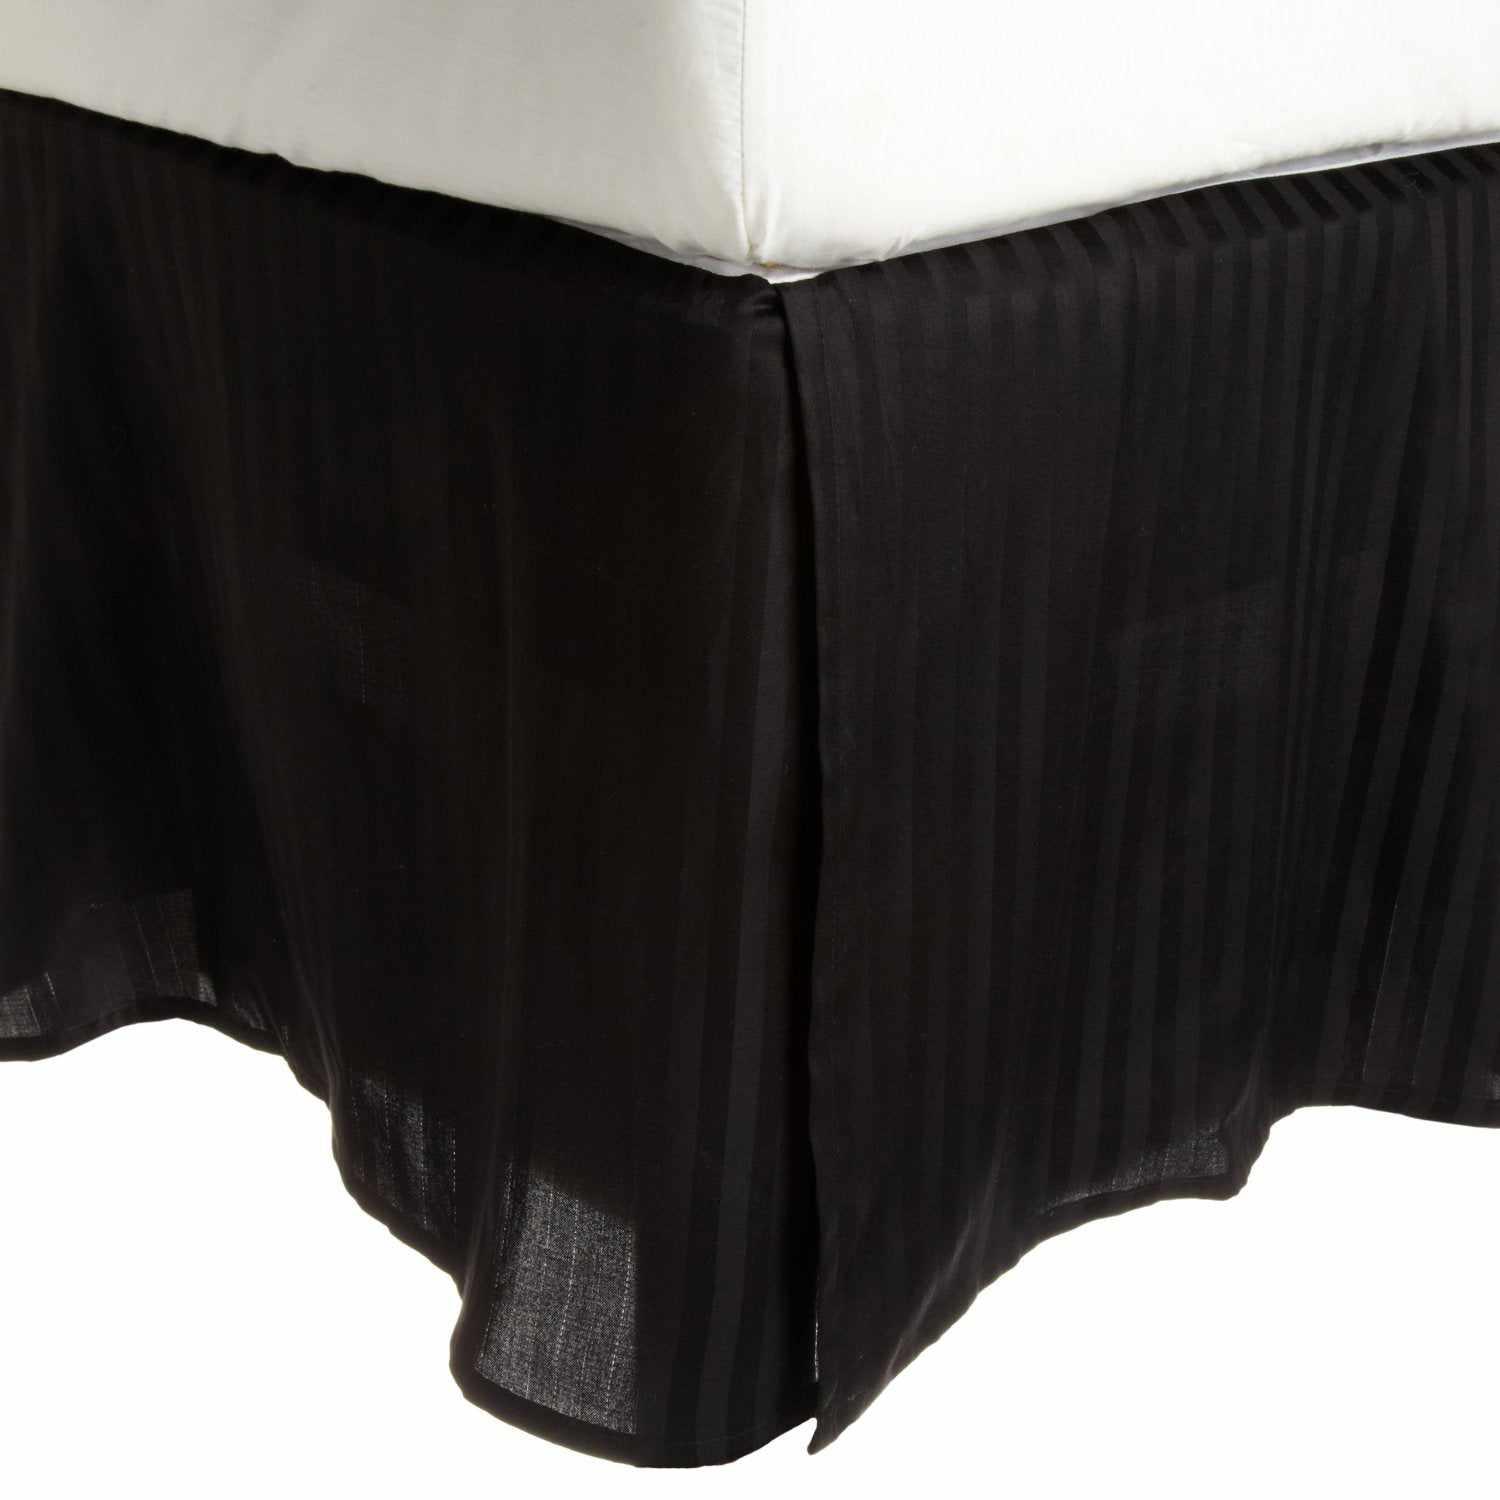 300-Thread Count Egyptian Cotton 15" Drop Striped Bed Skirt - Black